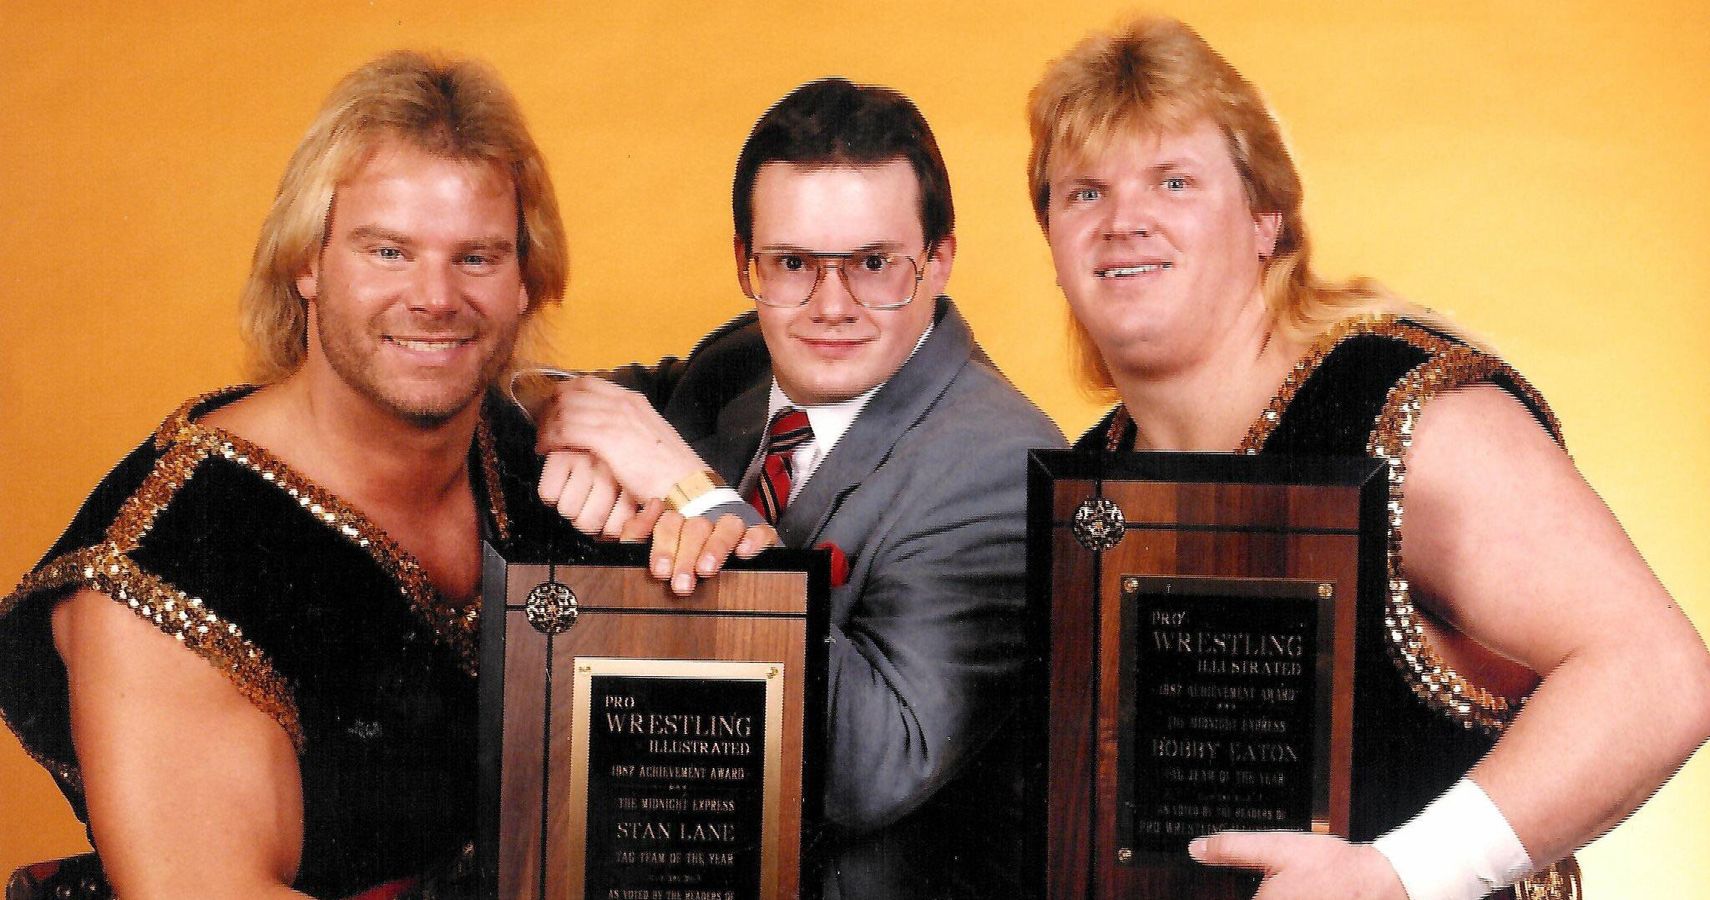 The 10 Best WCW Tag Teams to Never Win The WWE Tag Titles